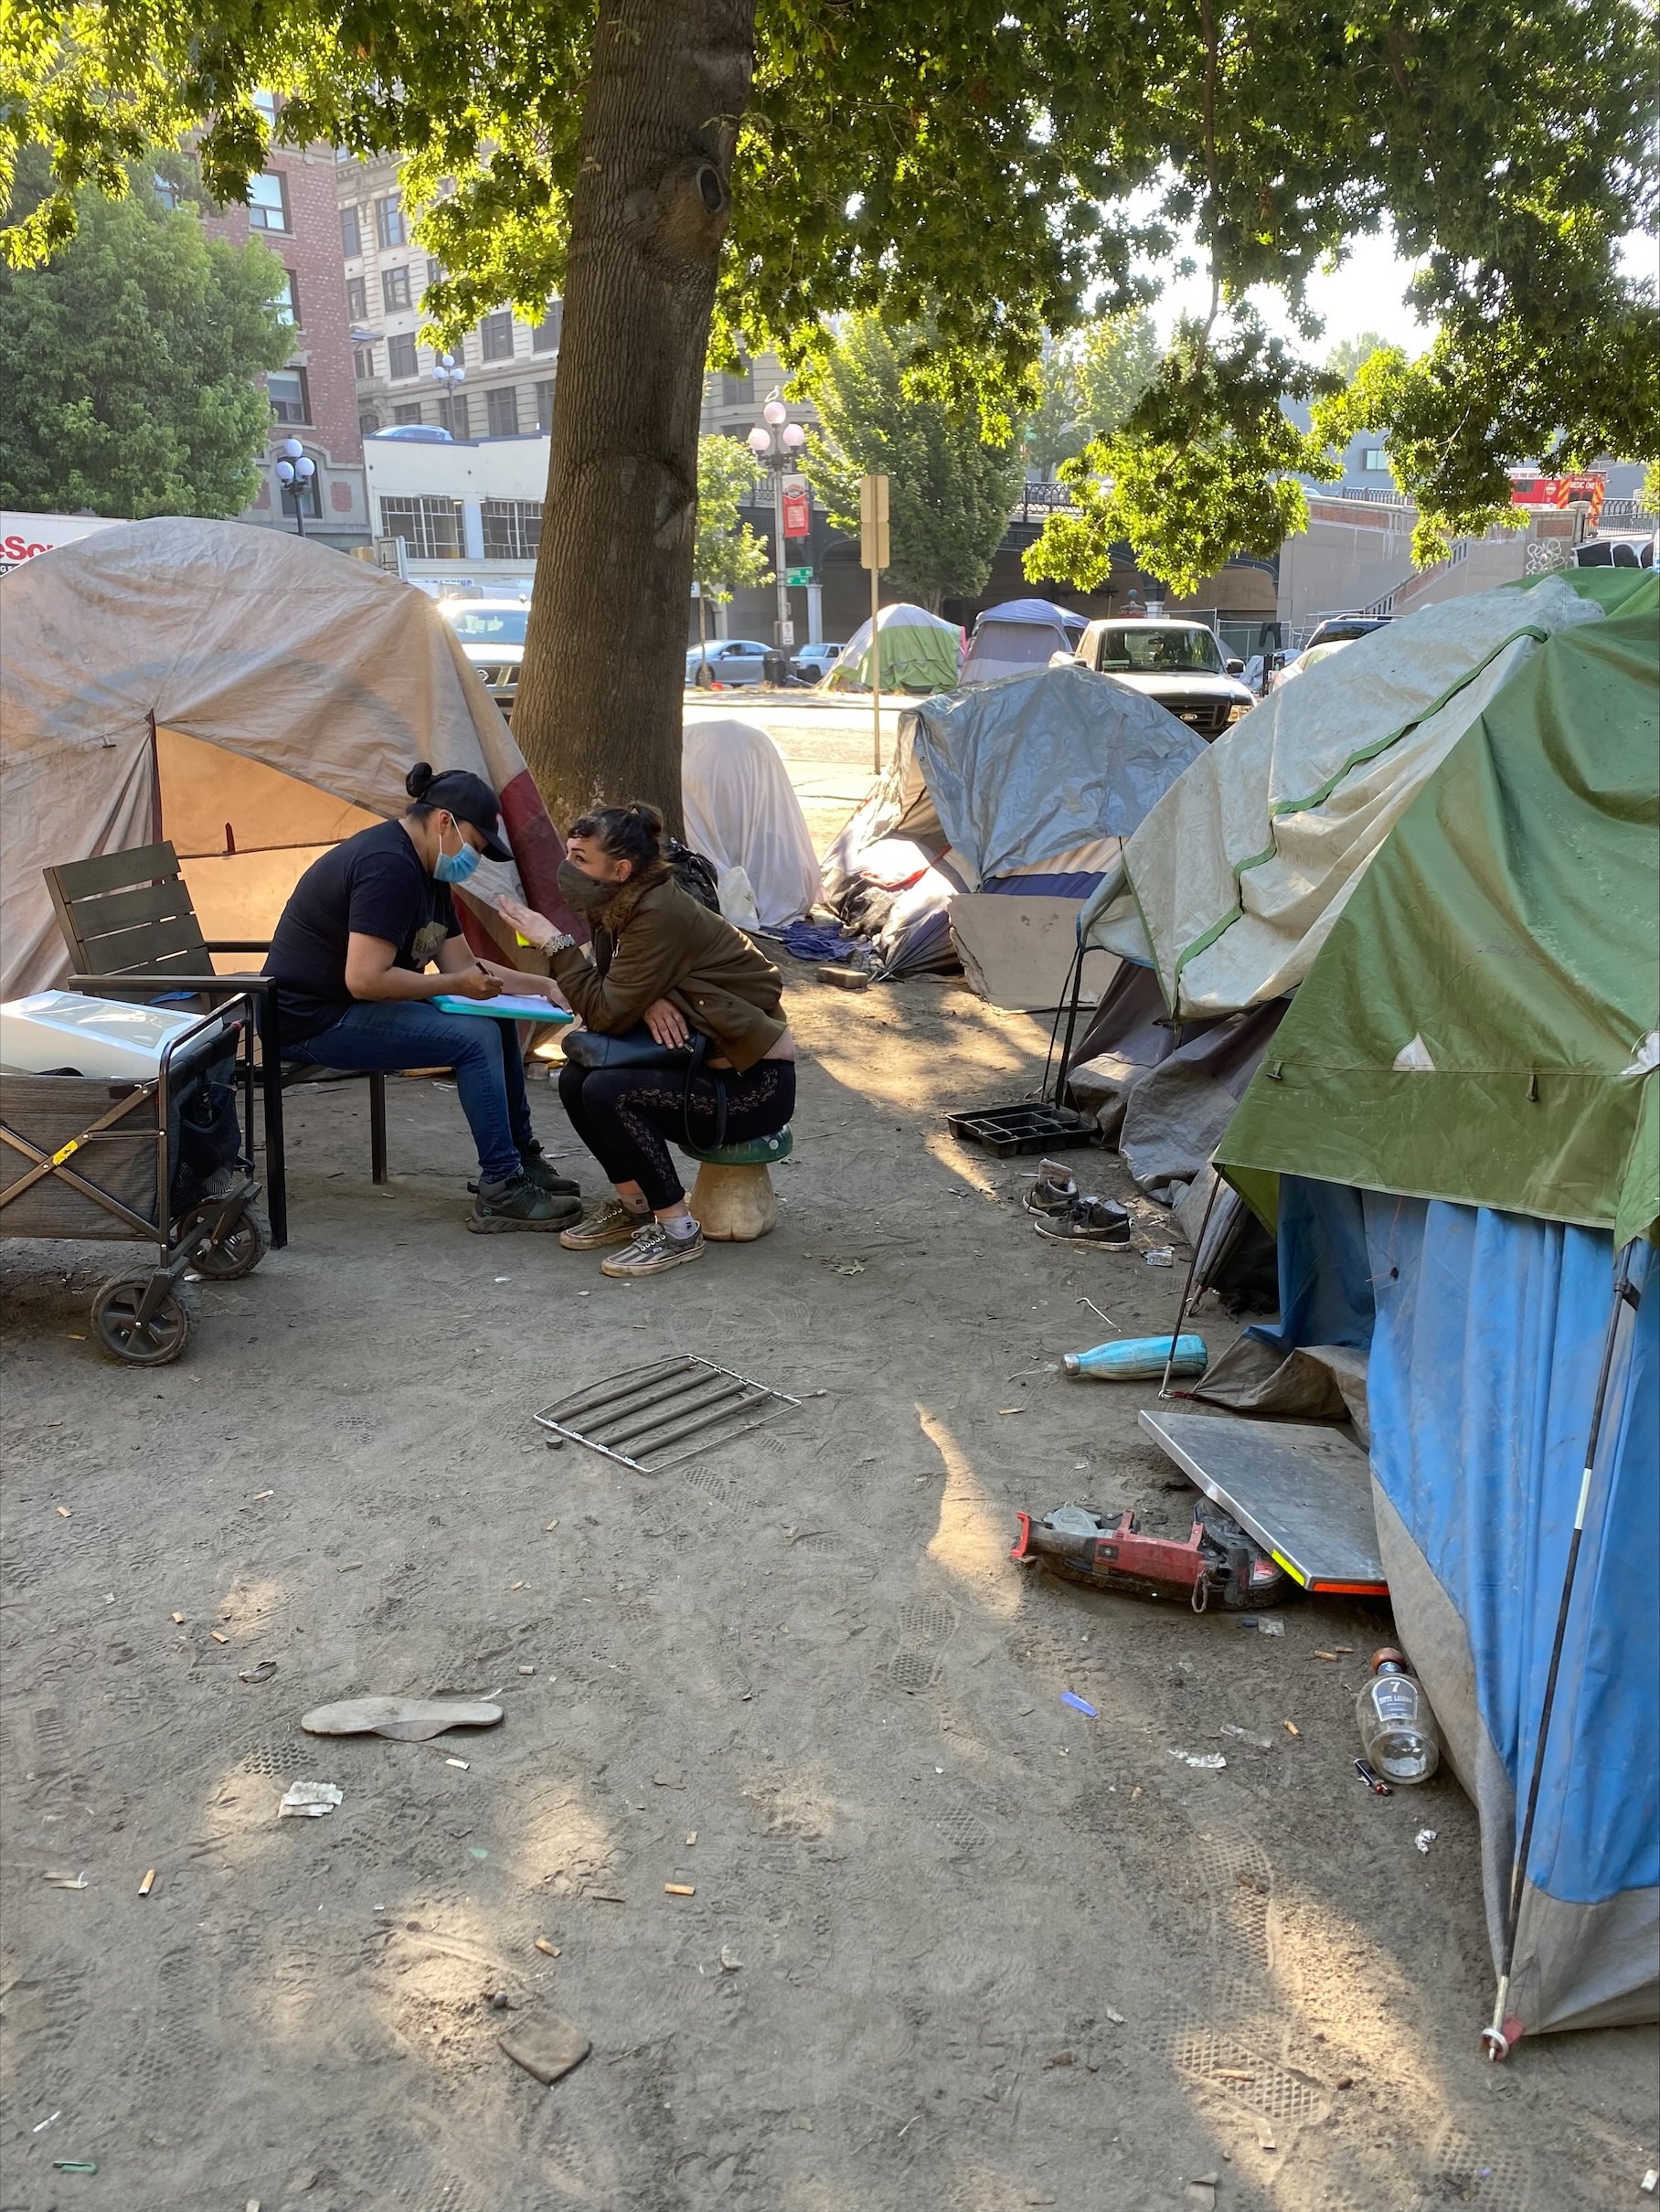 Several tents make up an encampment. In the background, a tree. Slightly left of center, an ETS outreach worker kneels in front of a client as they talk together.